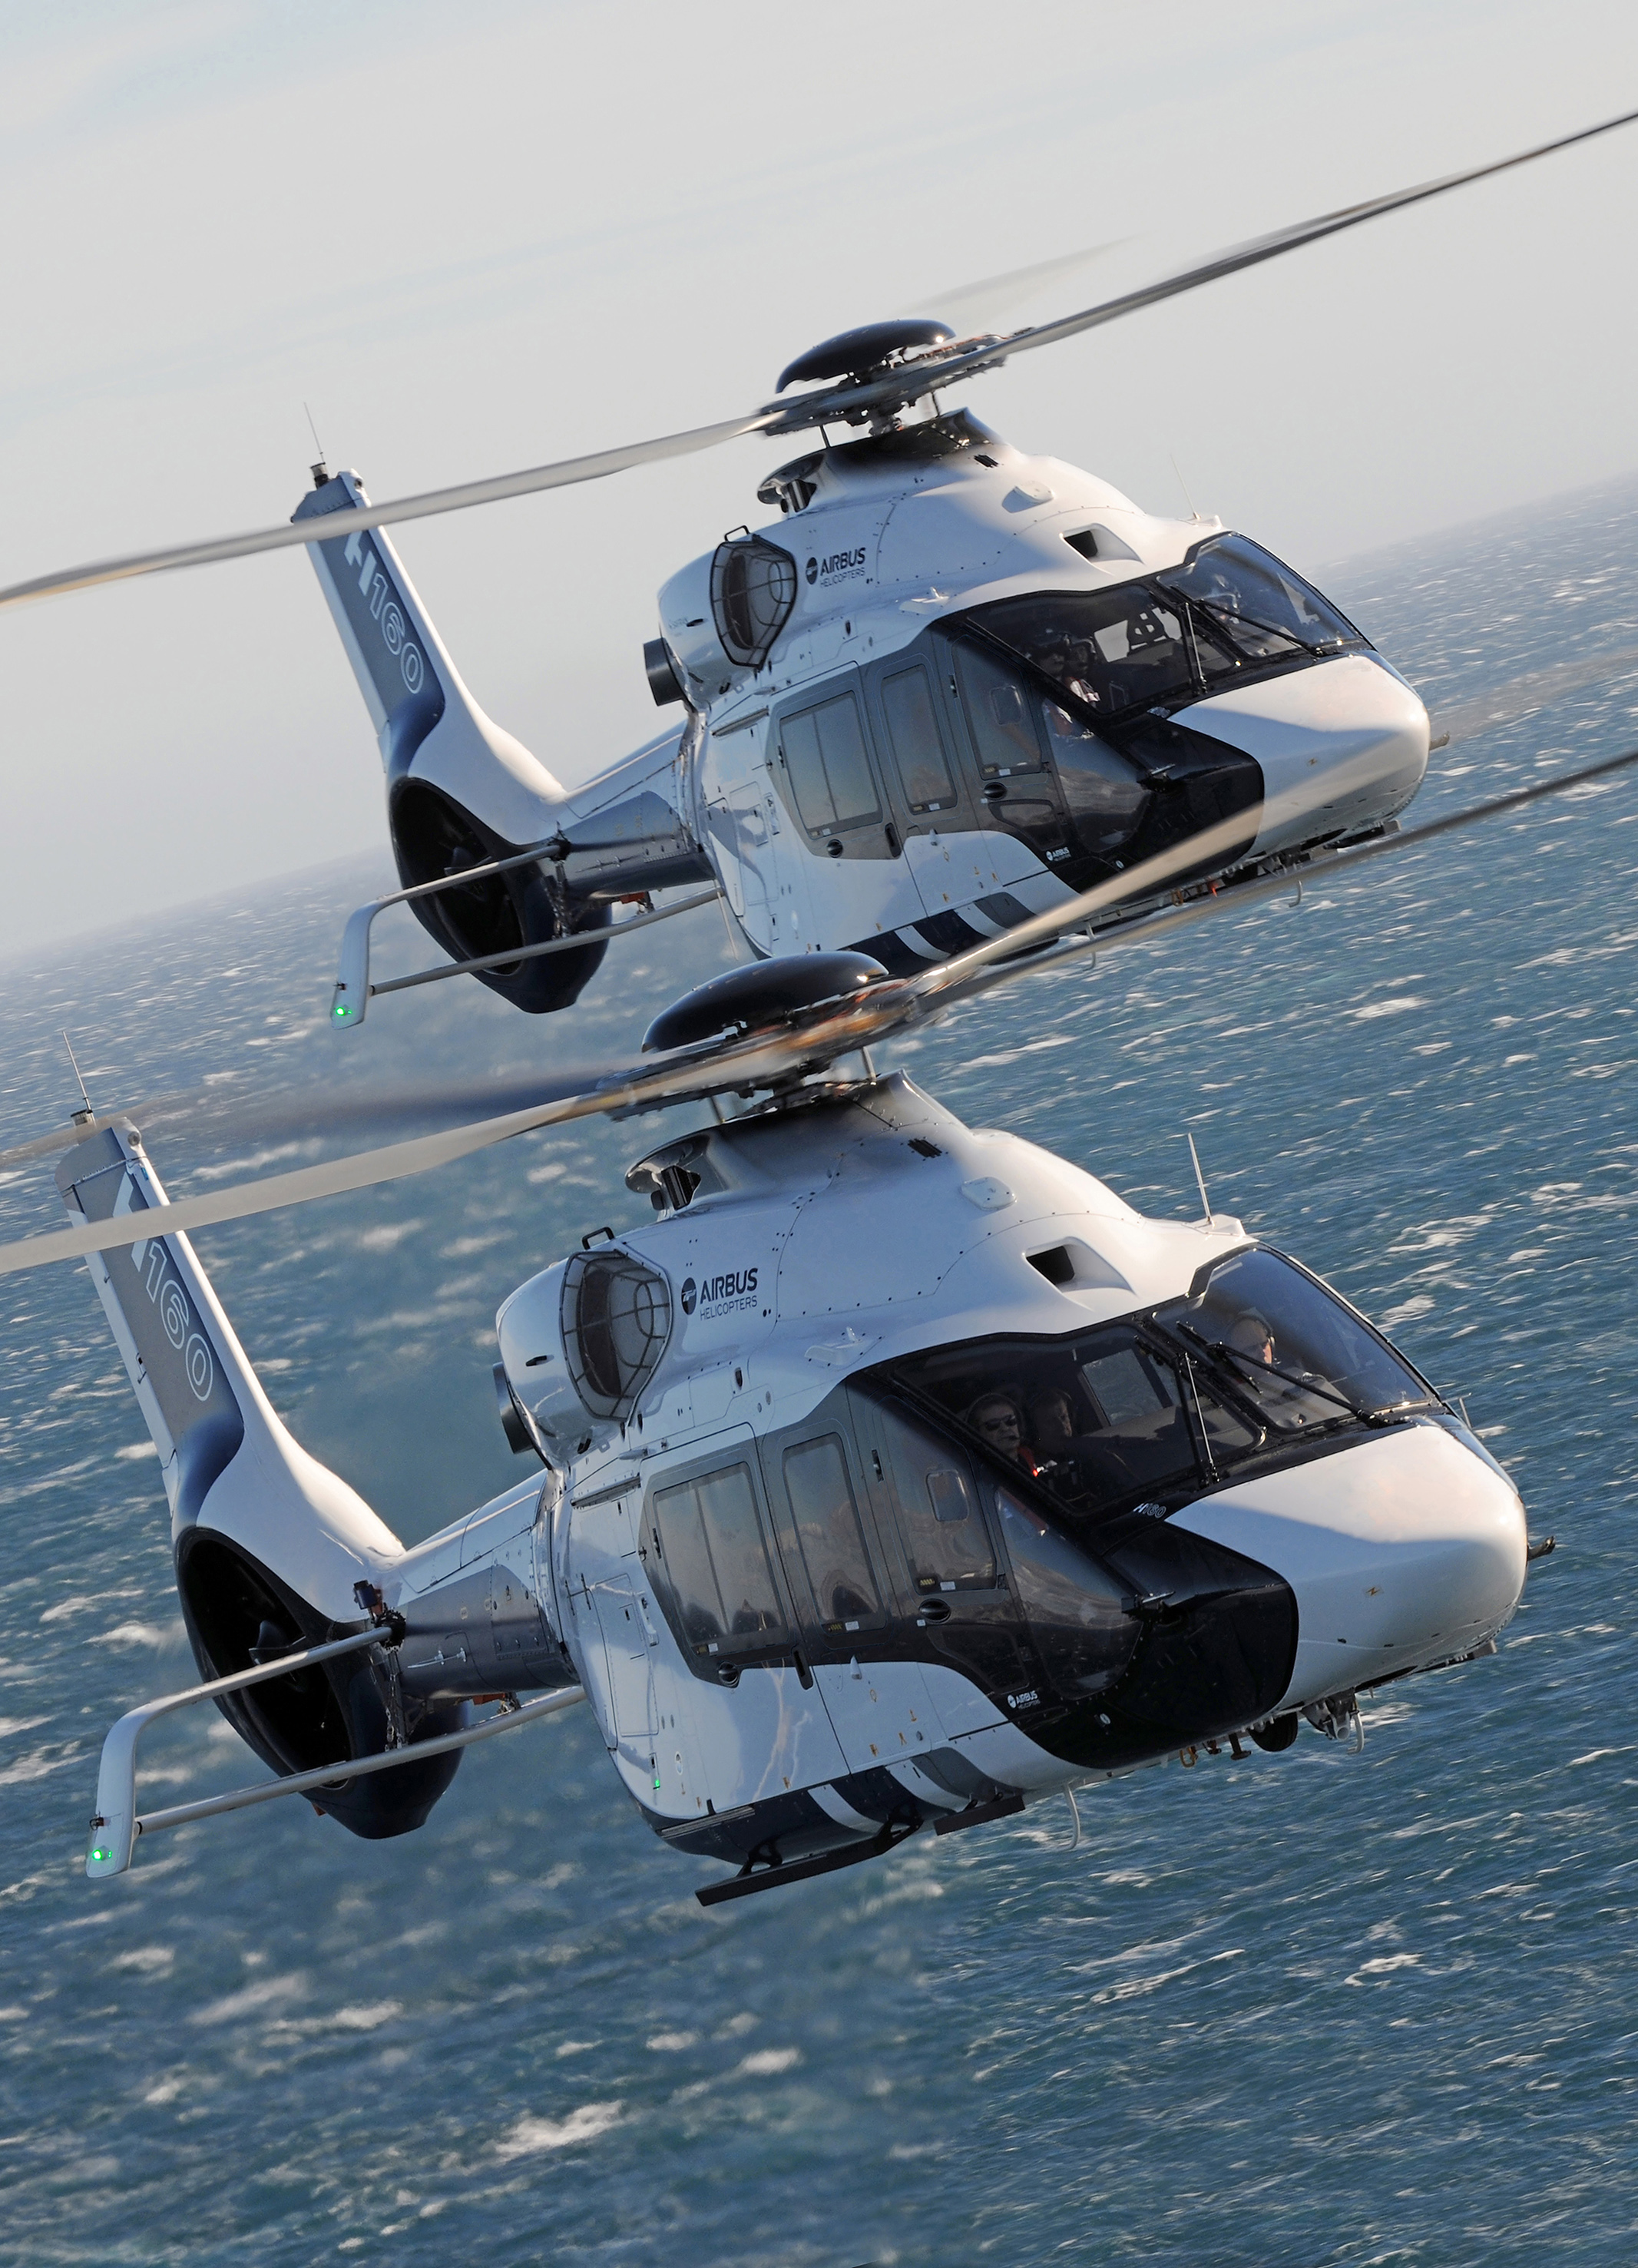 The H160, with three prototypes now in flight testing, is currently preparing certification and entry into service in 2019, with the first version to be the passenger transport one. Airbus Helicopters Photo